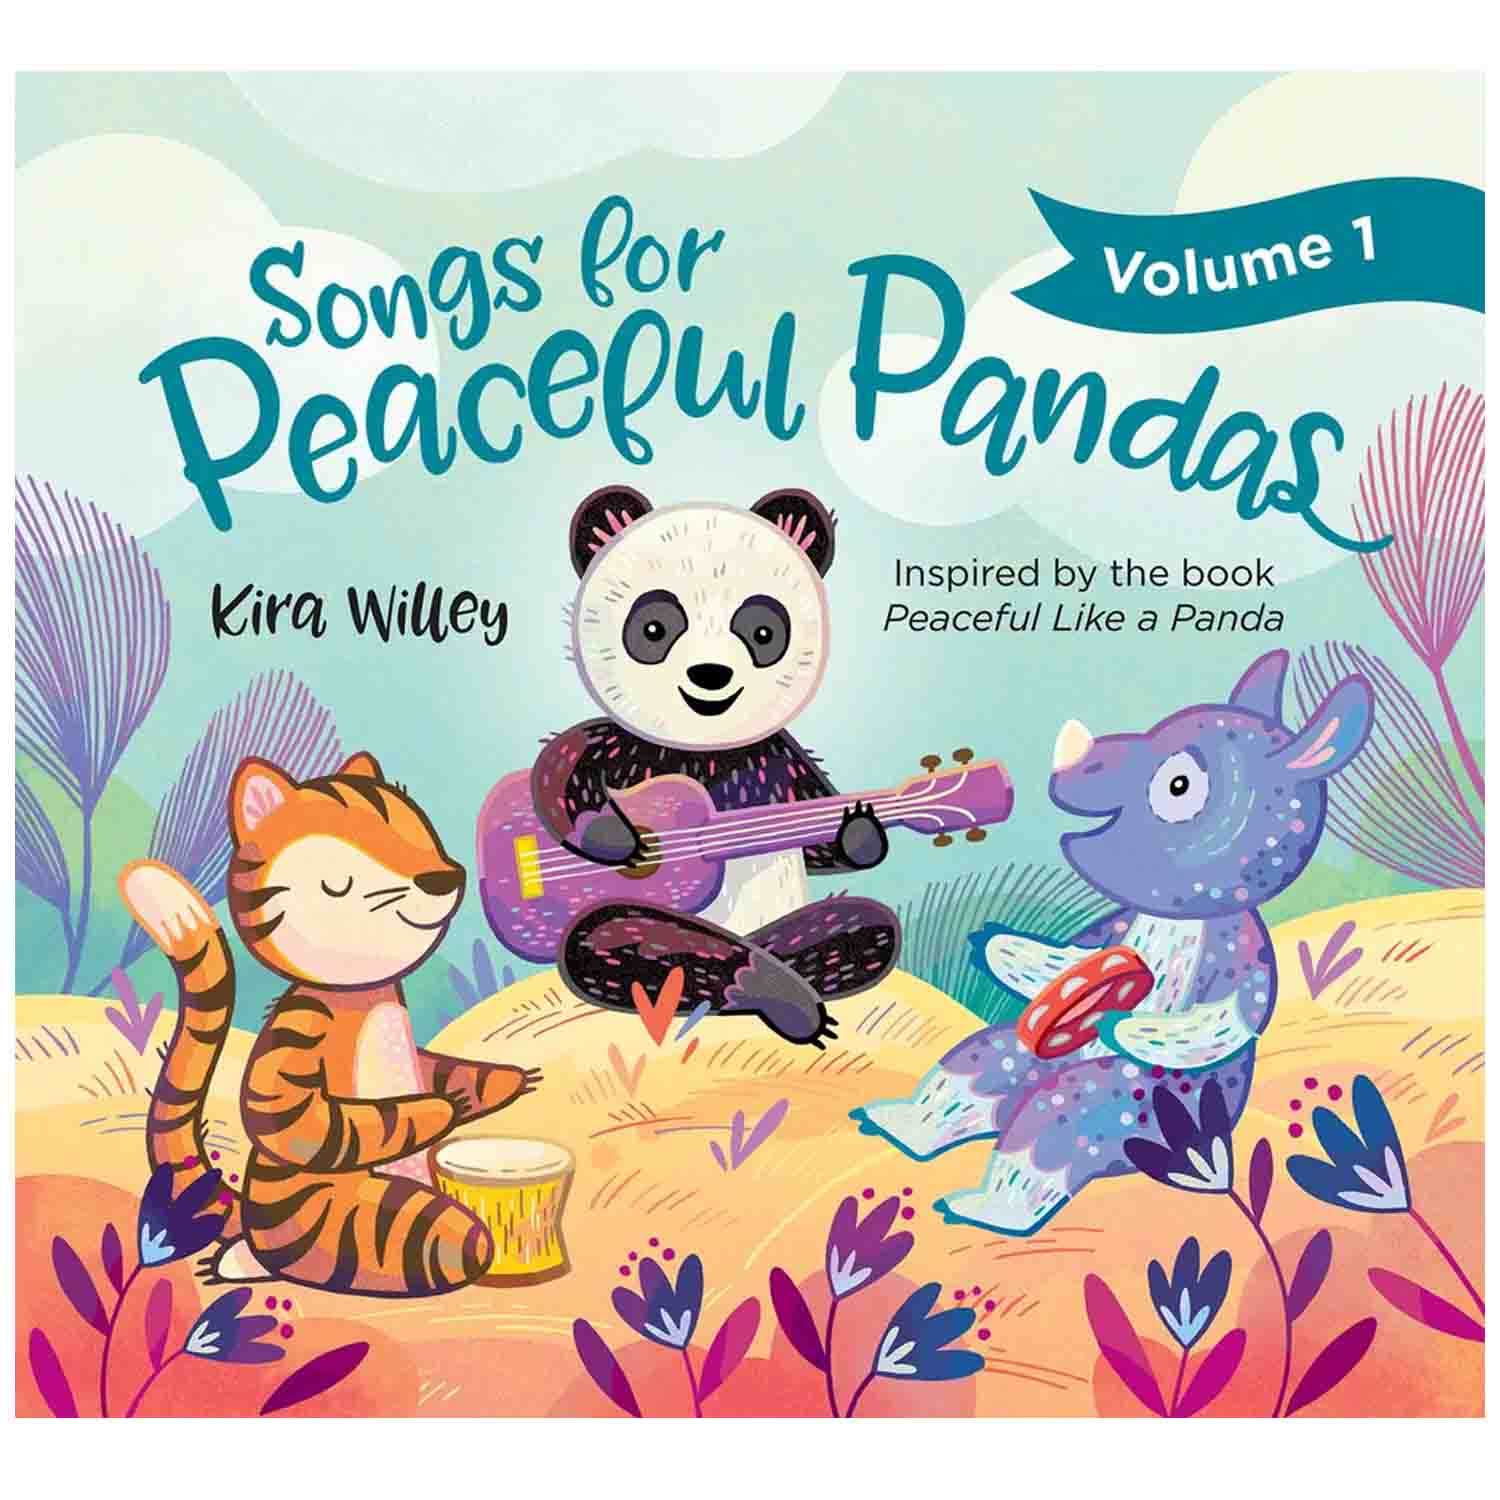 Songs for Peaceful Pandas